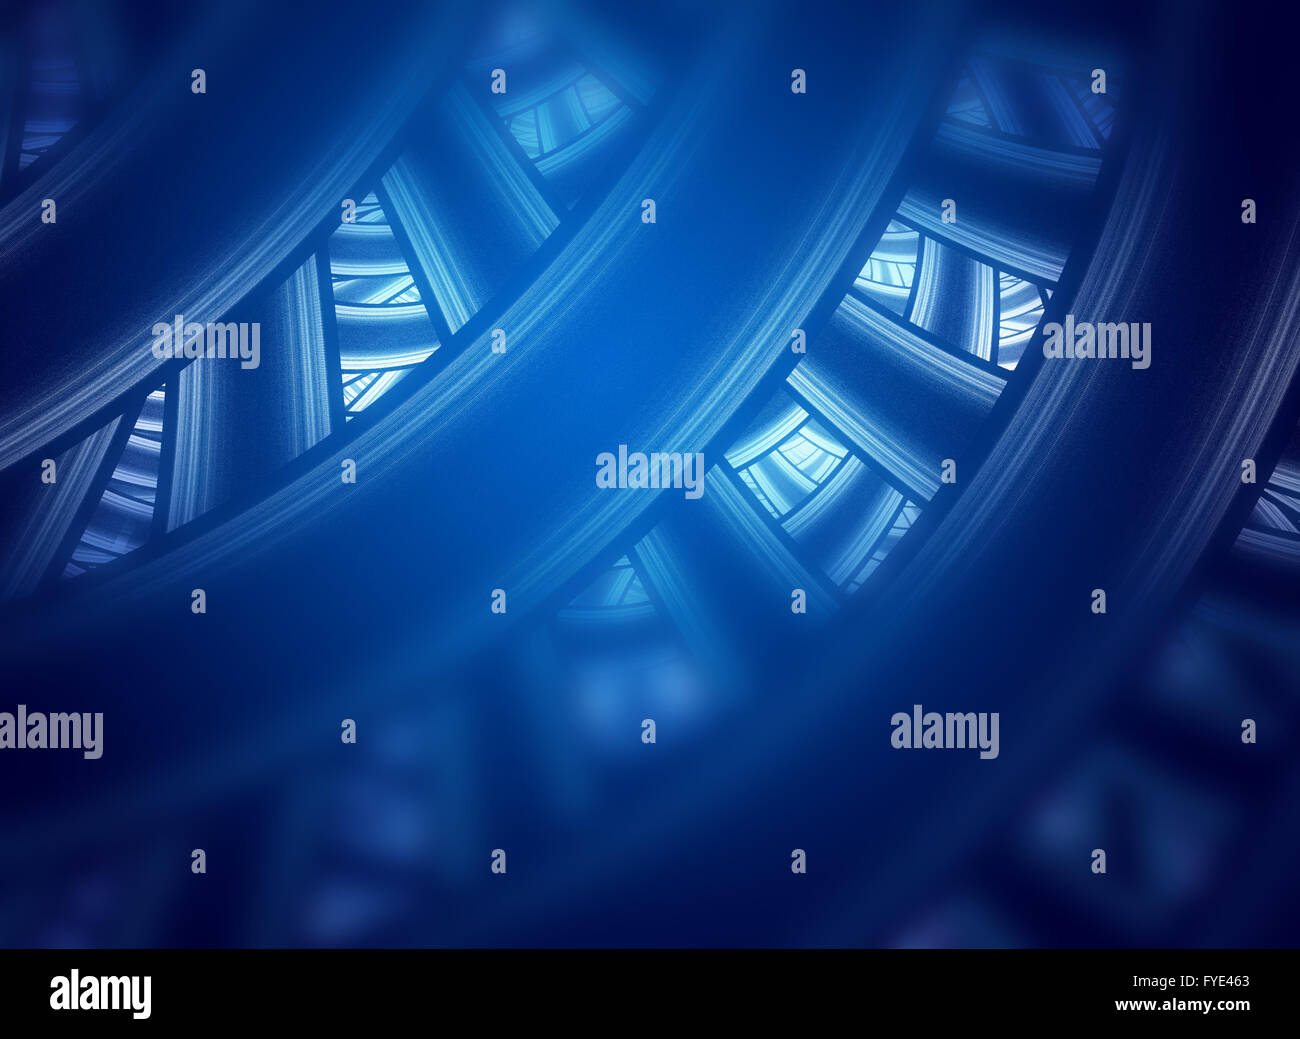 Fade blue, abstract background for creative design Stock Photo